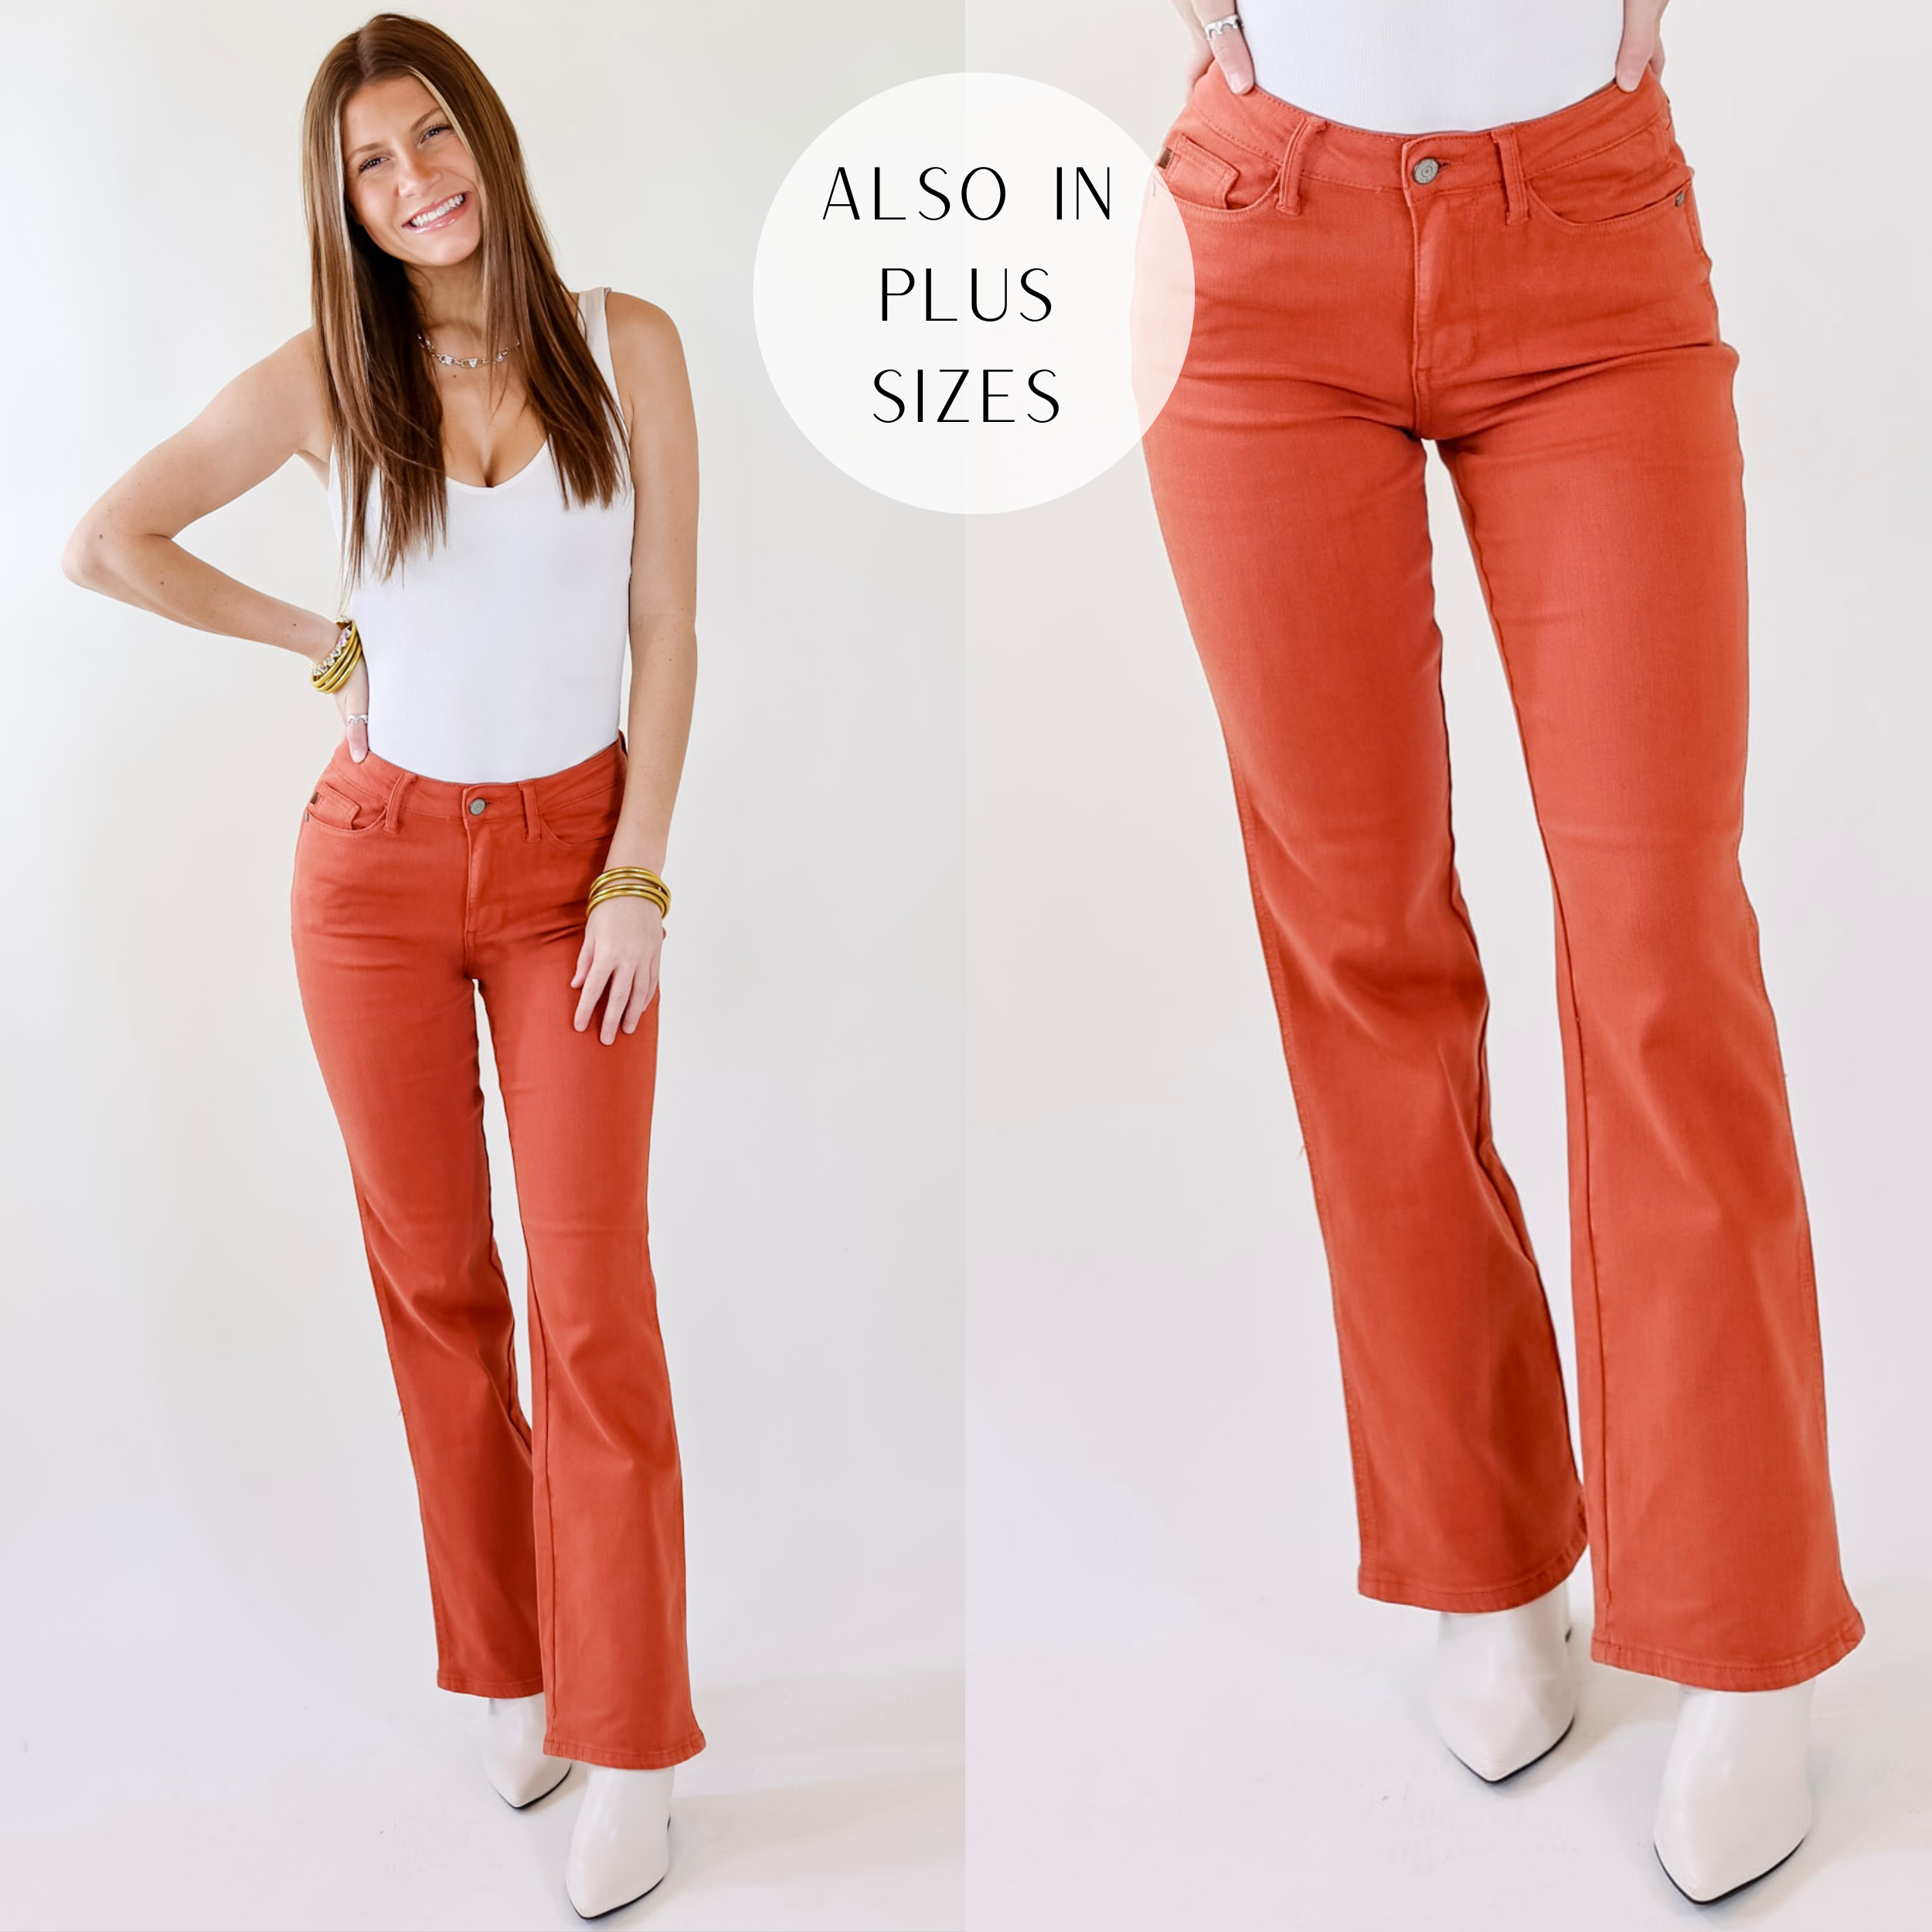 Model is wearing a pair if rust orange bootcut jeans. Model has these jeans paired with a white tank top, white booties, and gold jewelry.